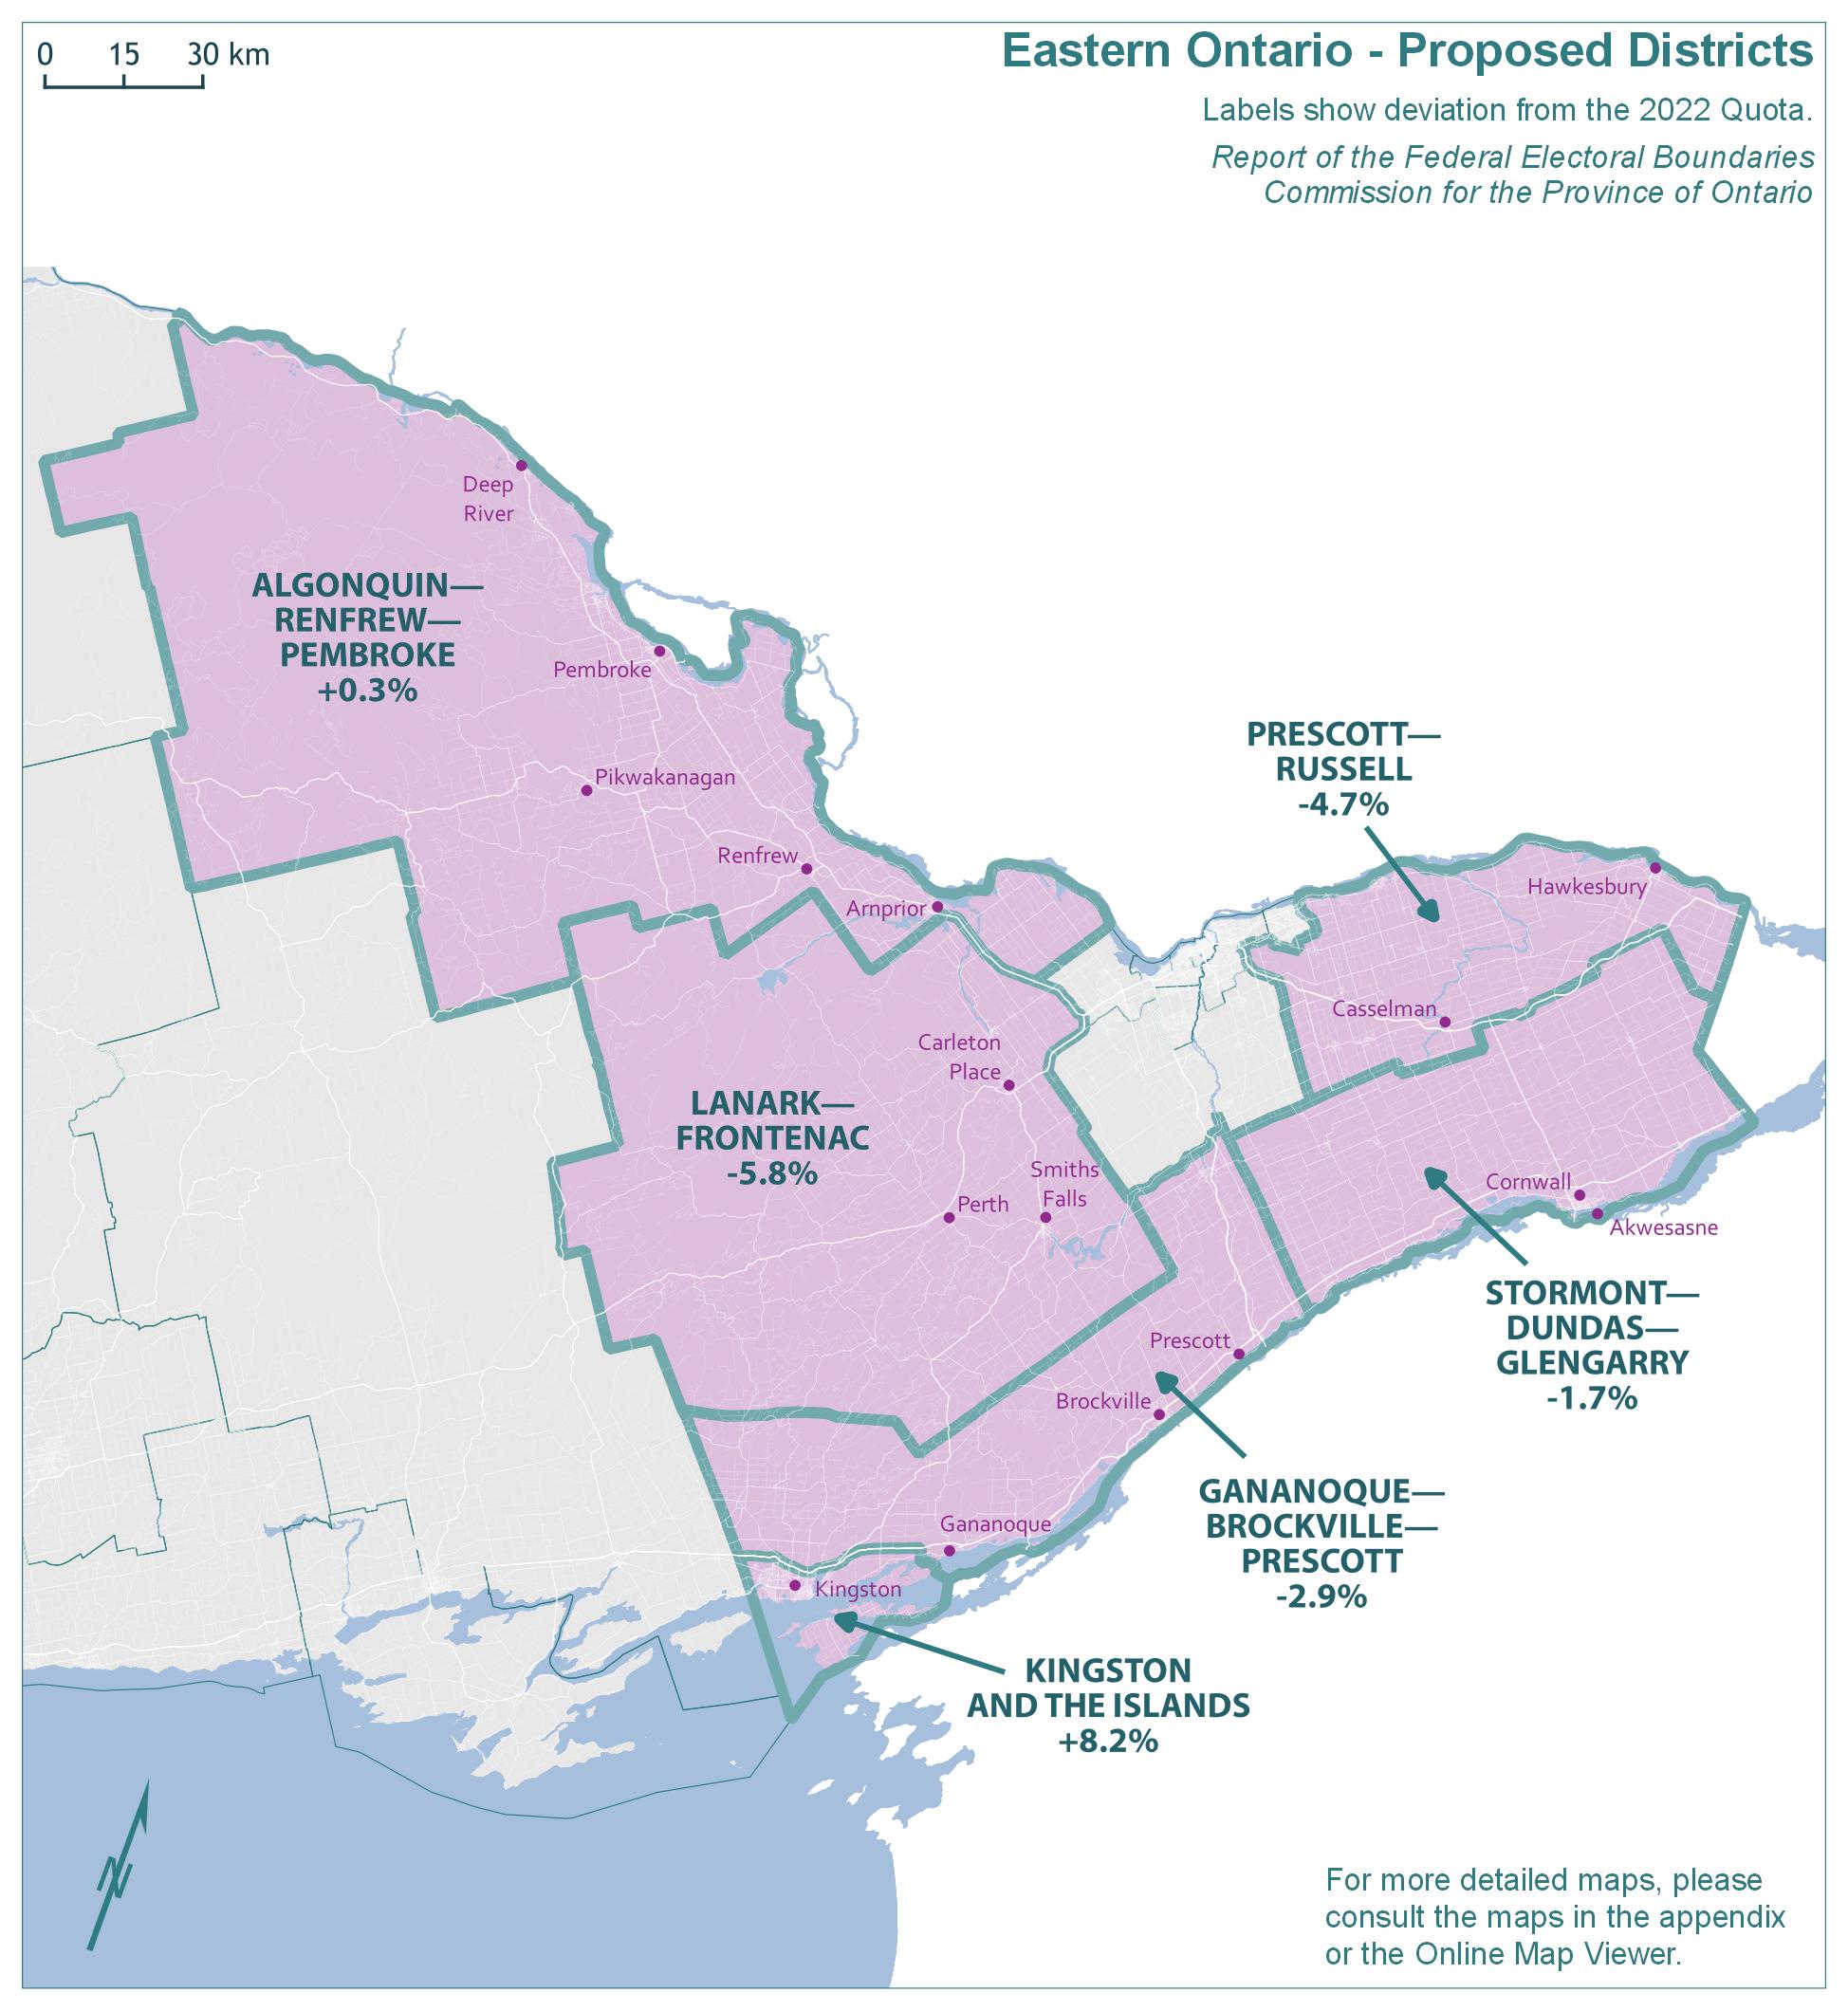 Eastern Ontario - Proposed Districts